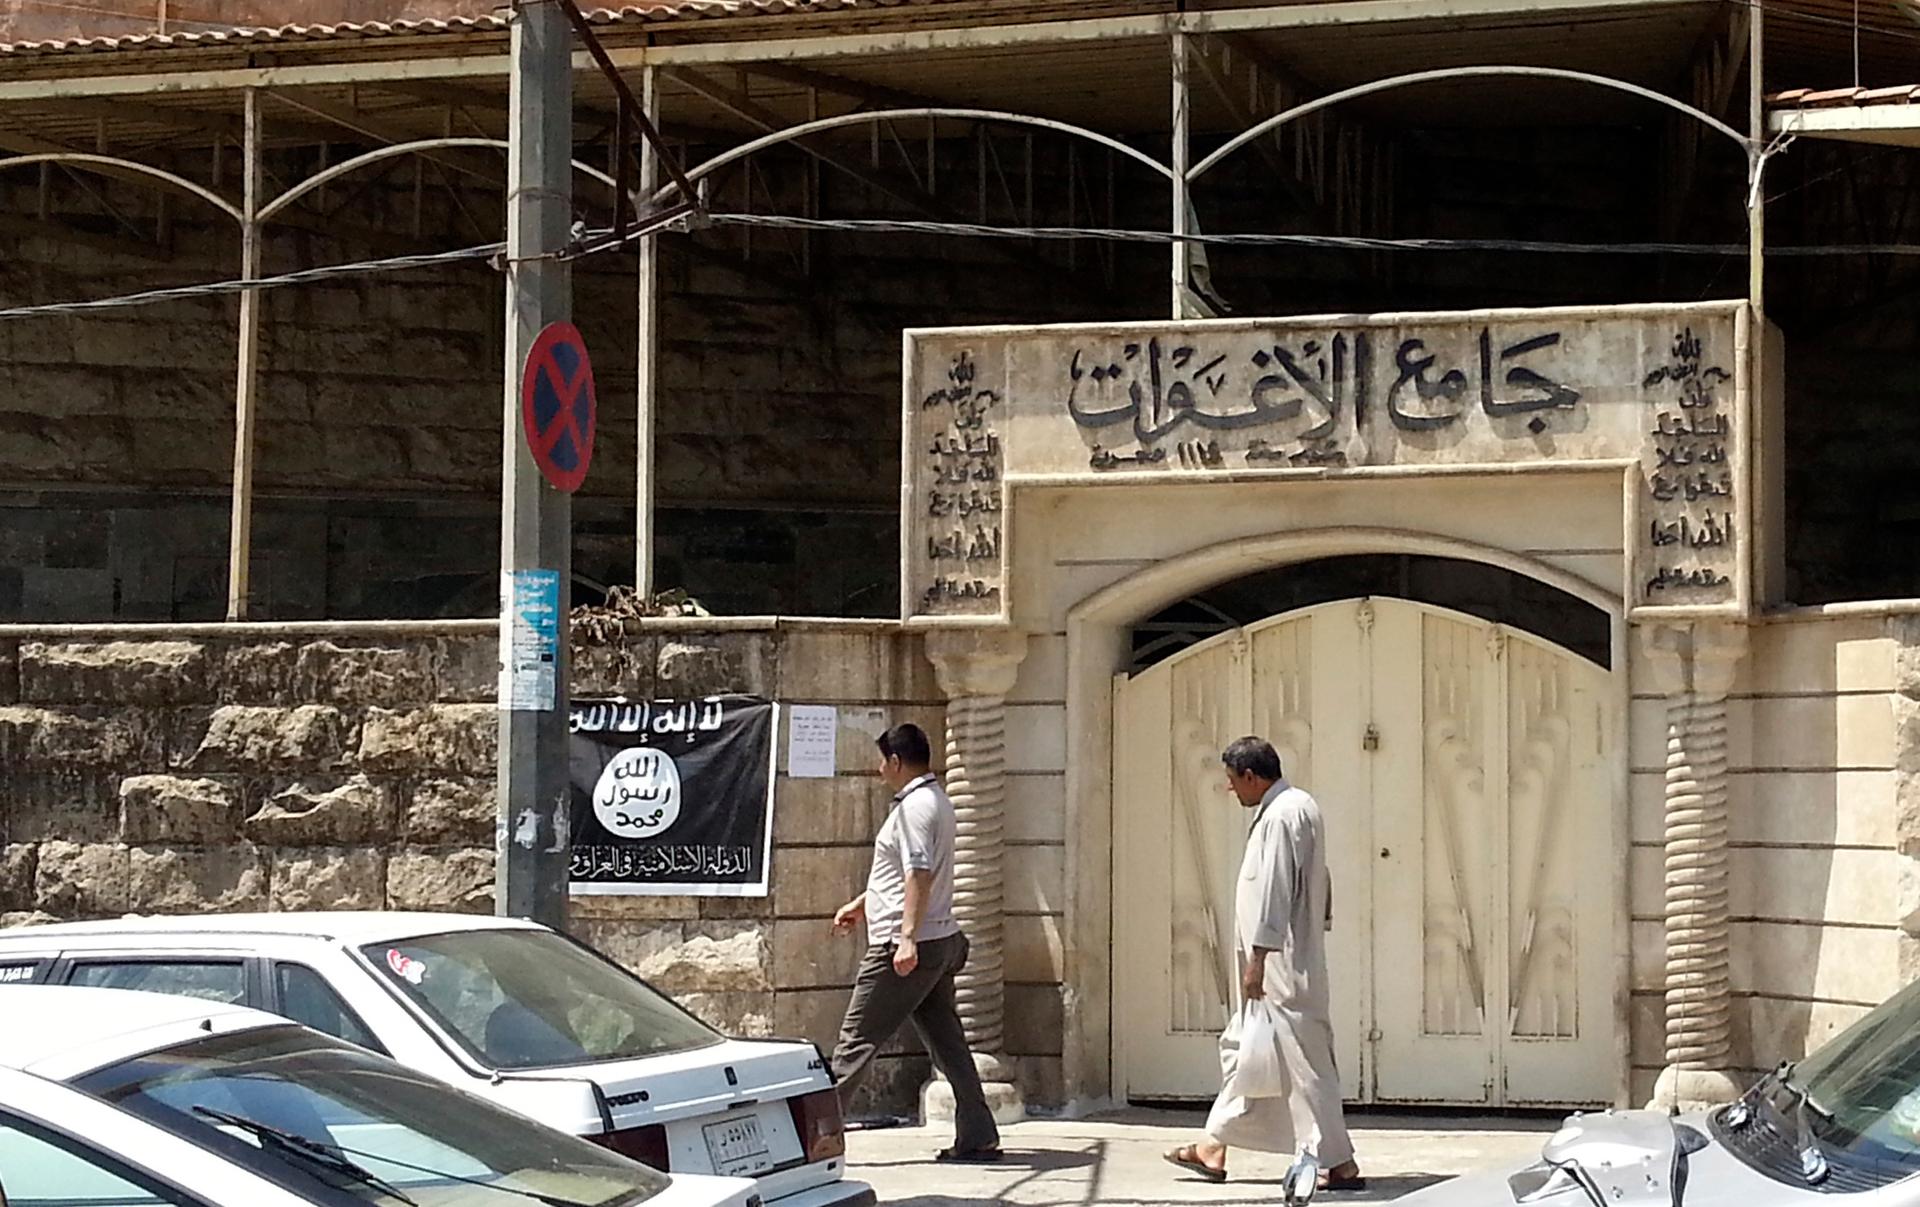 People in Mosul walk past a flag for Islamic State in Iraq and Syria